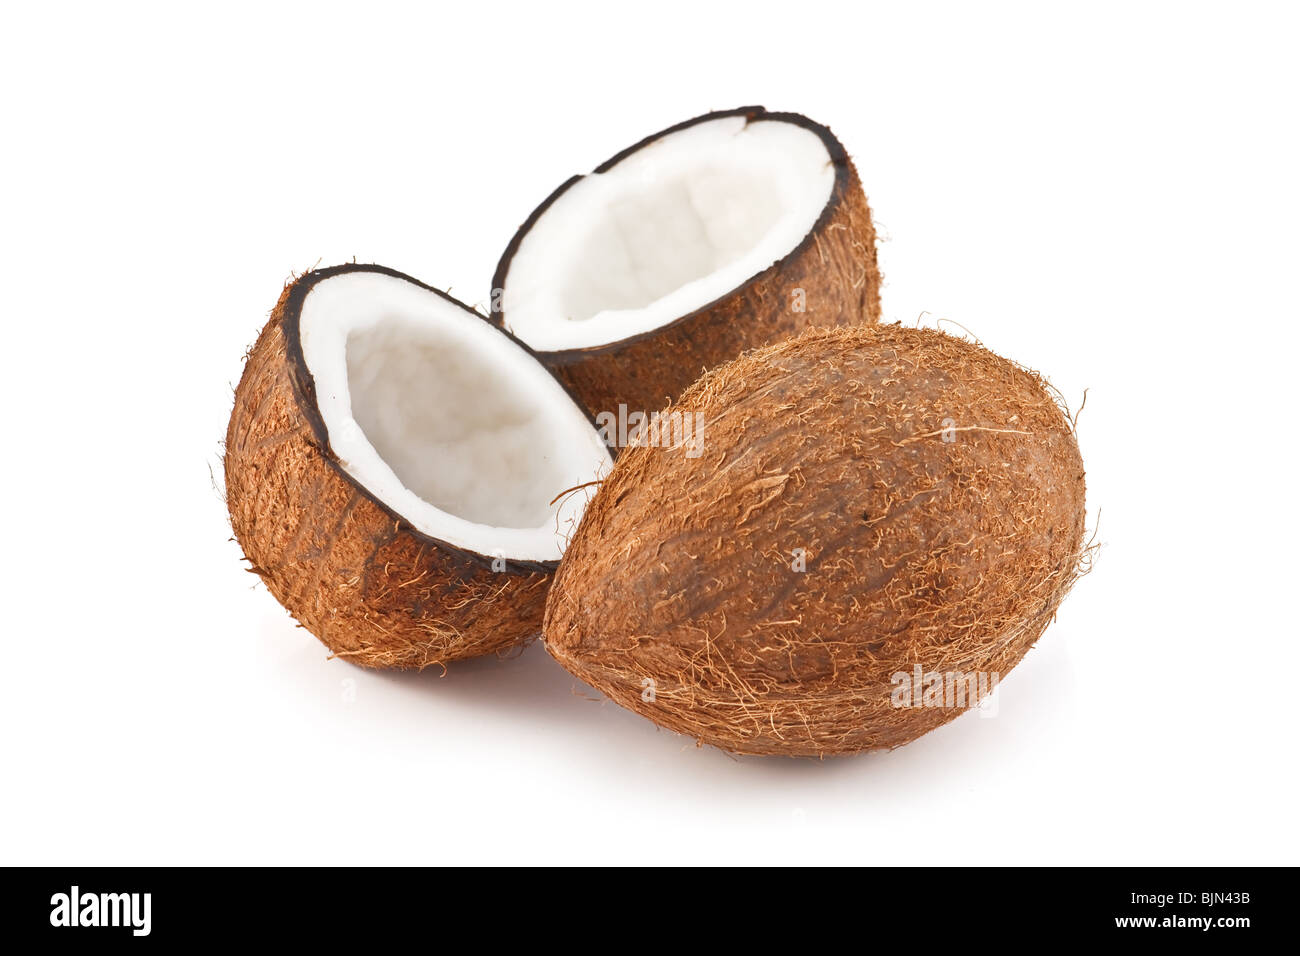 Coconut isolated on white Banque D'Images